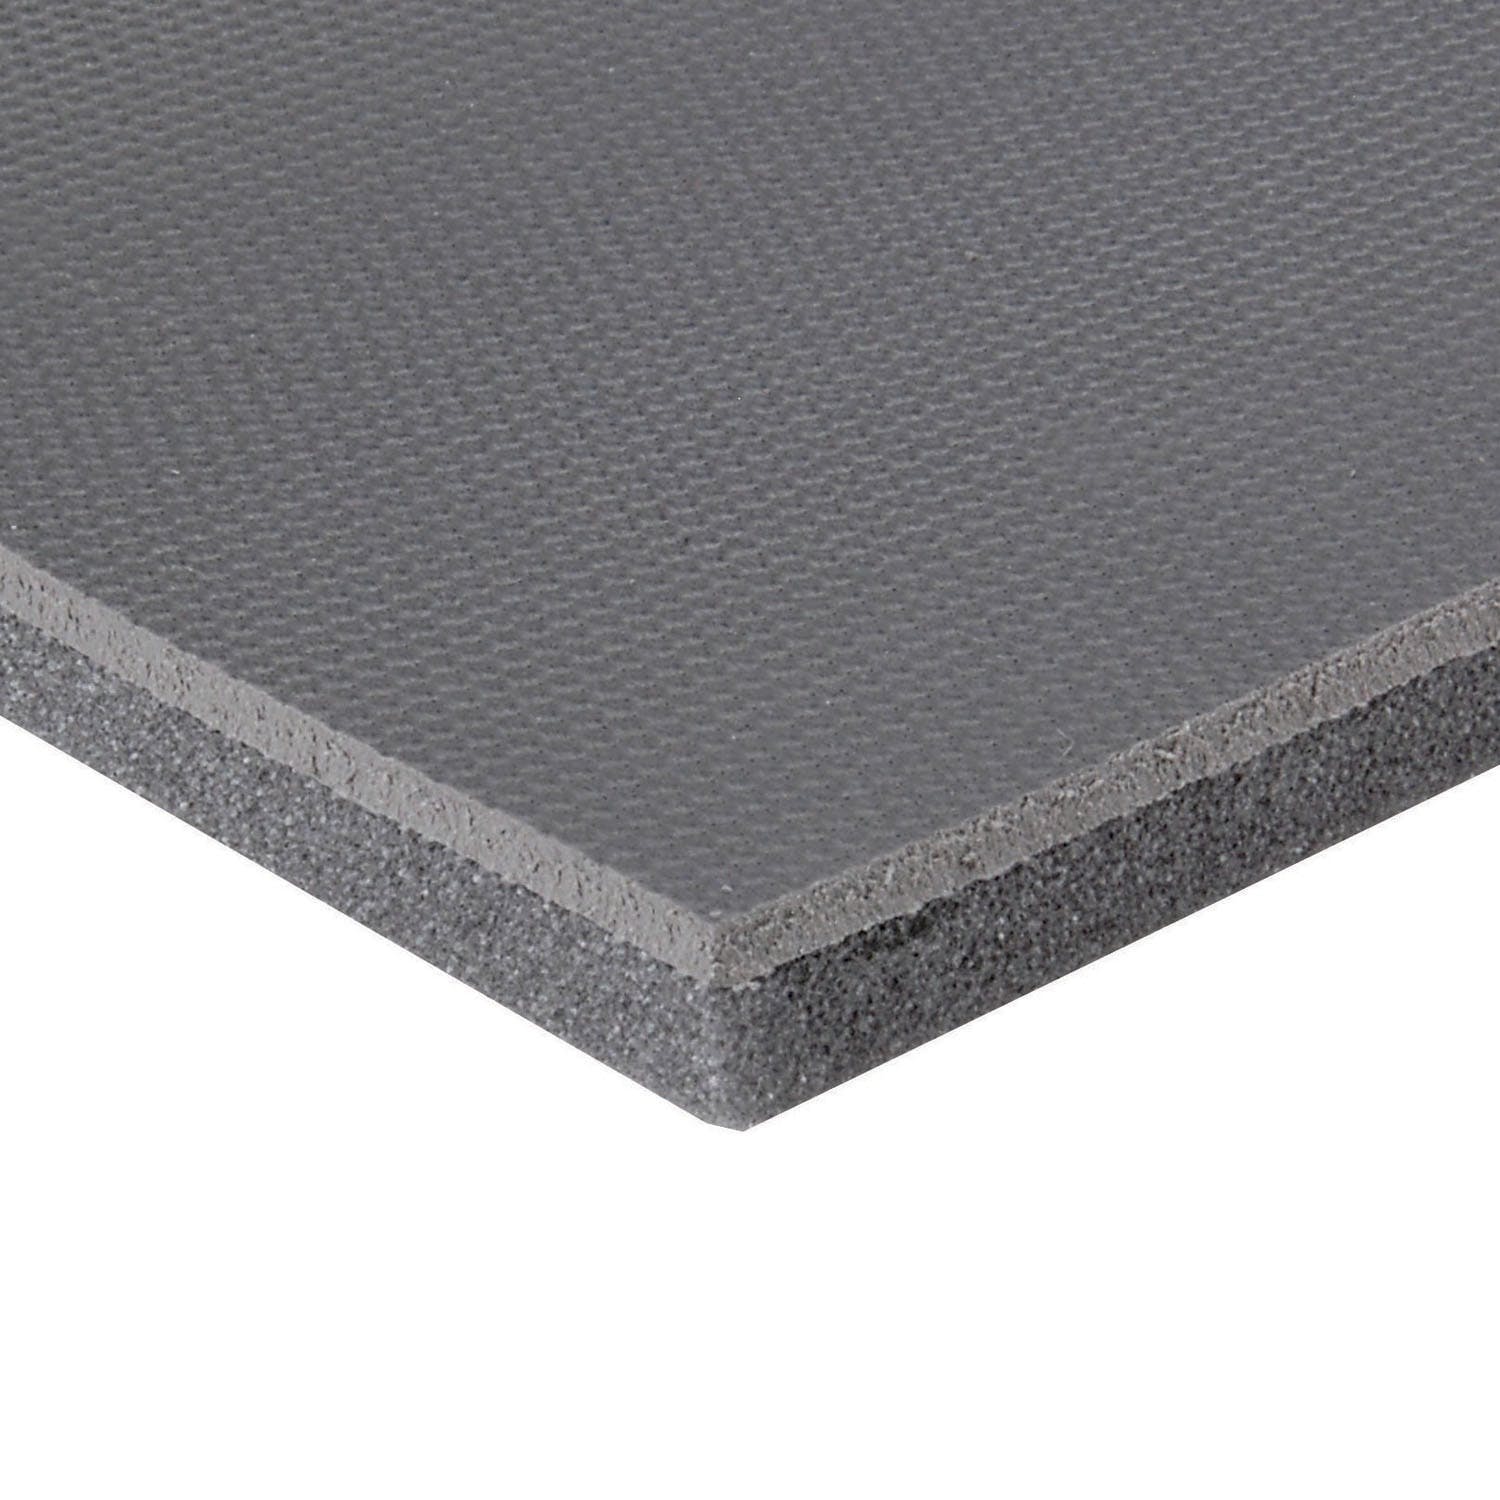 Design Engineering, Inc. 50102 Under Carpet (UC) - Bulk Lengths - 54 Wide-Sold By The Linear Foot